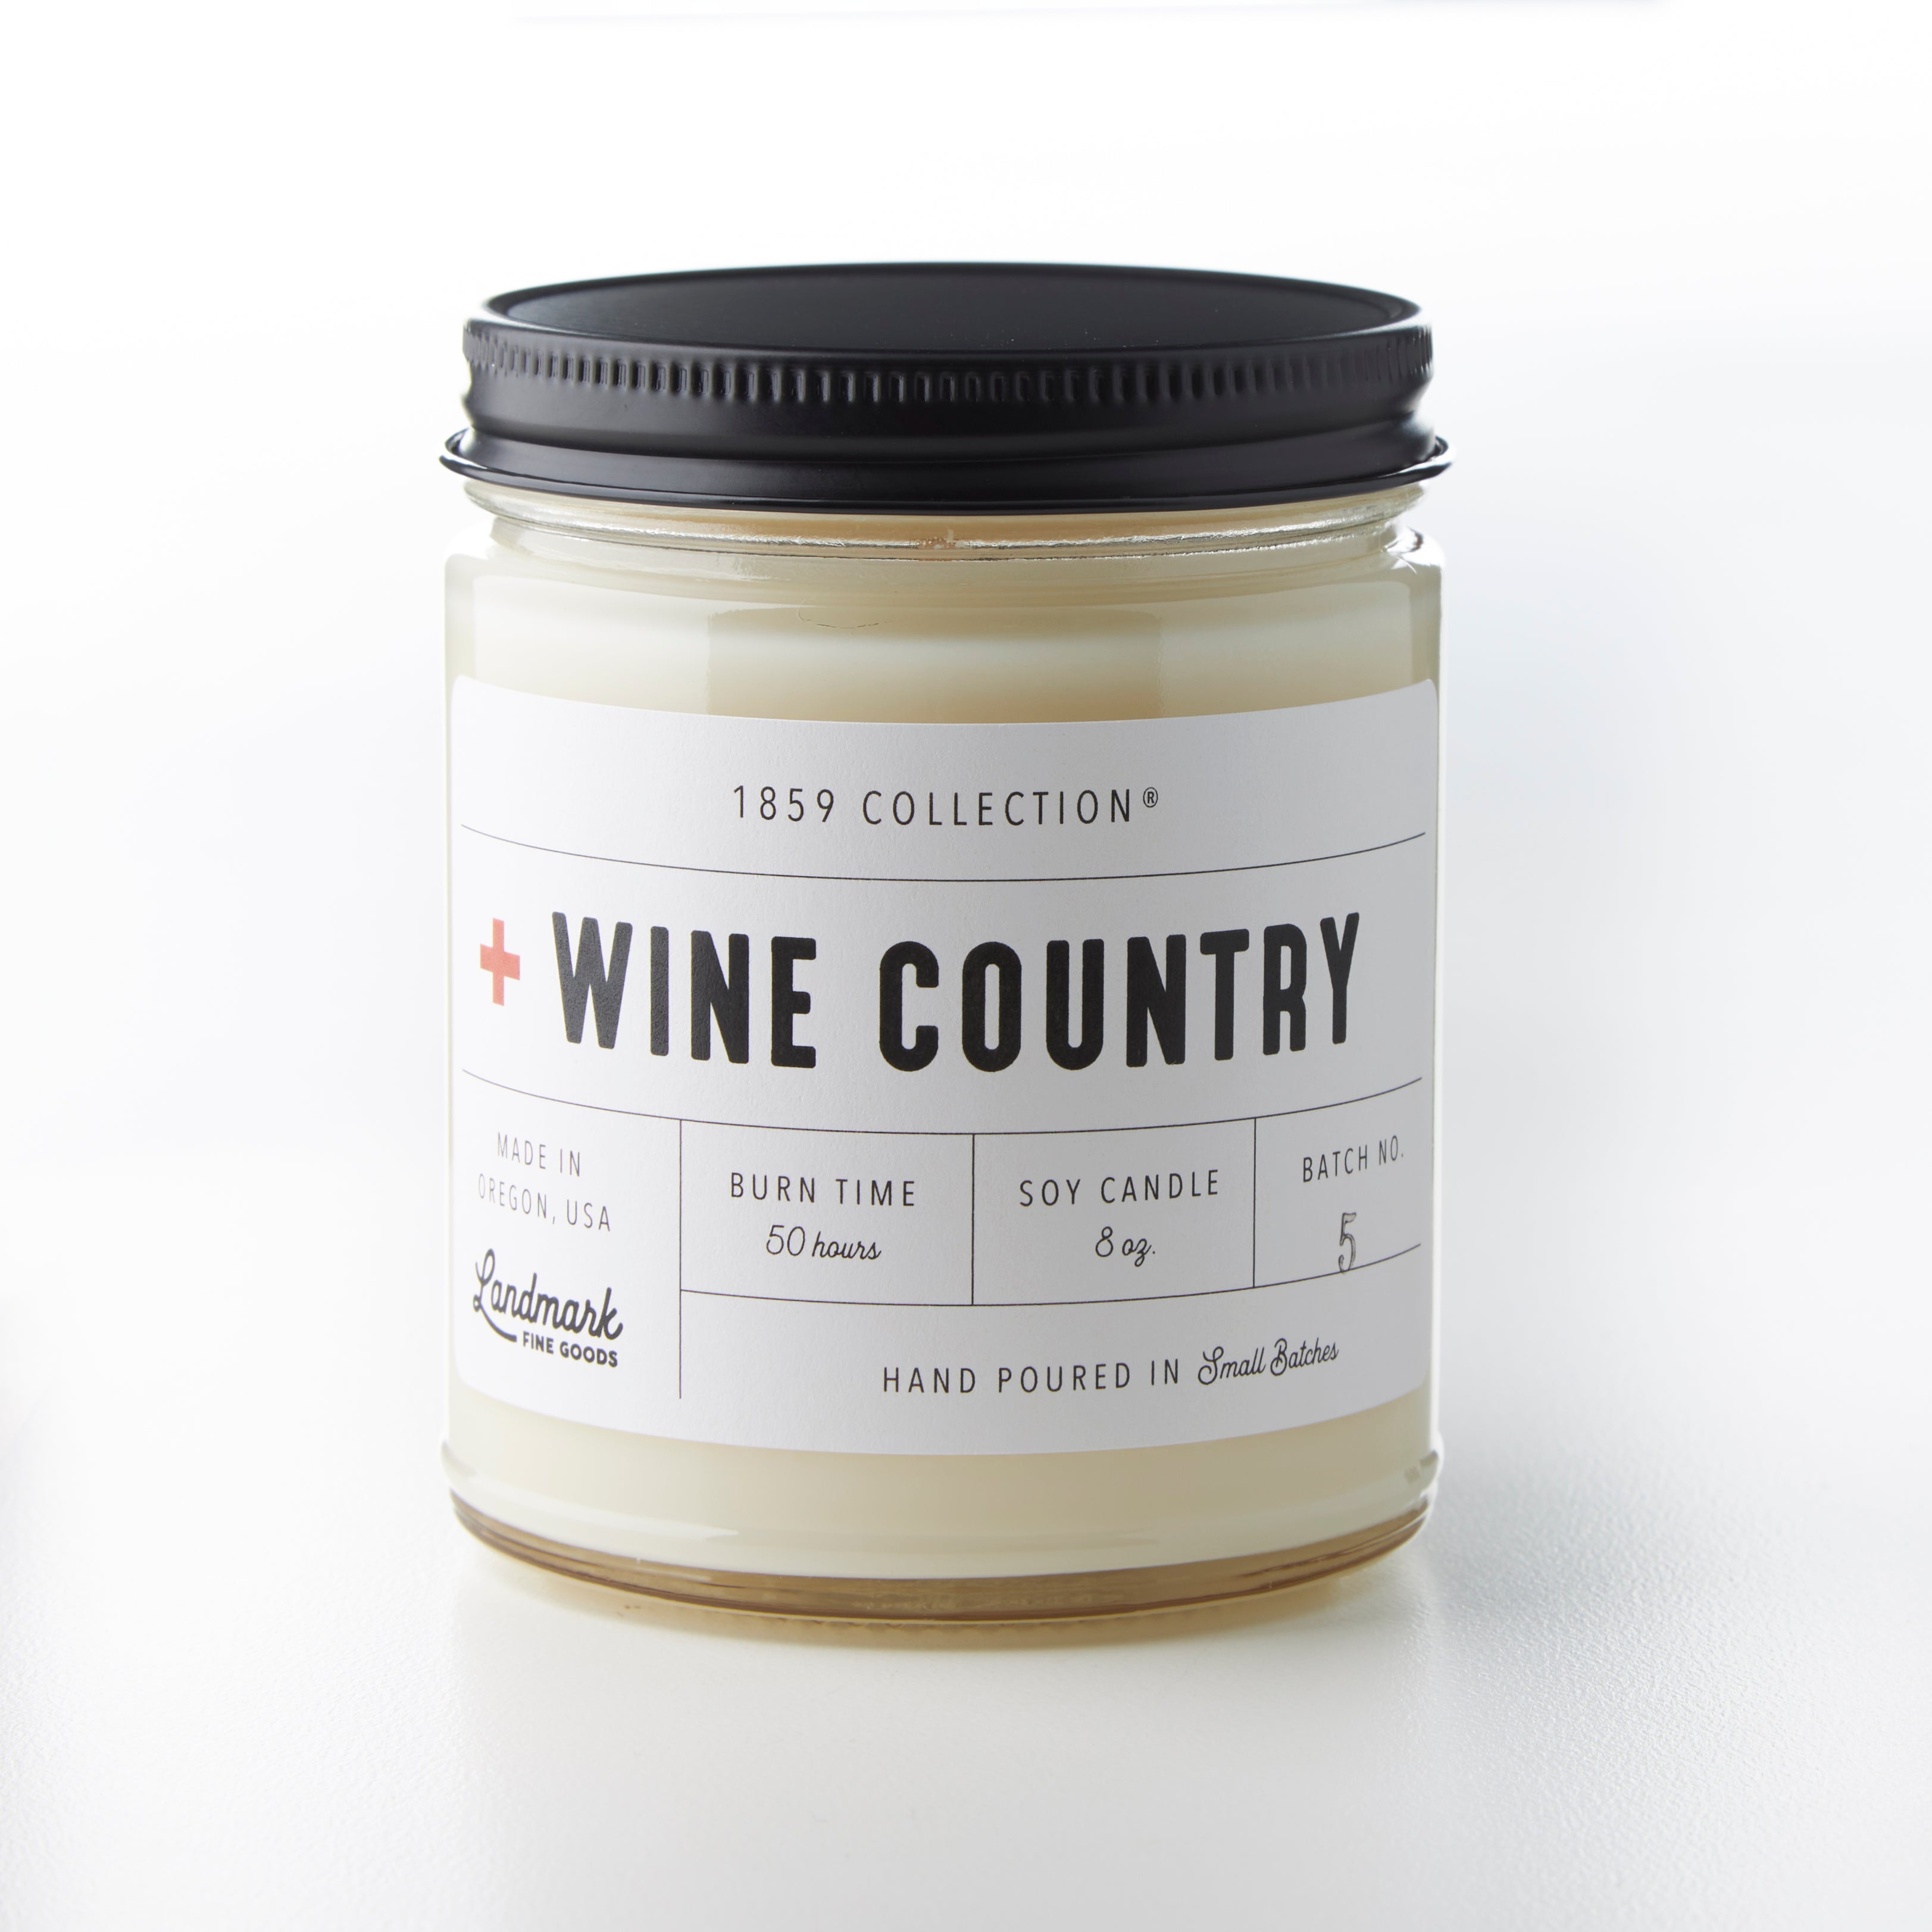 Wine Country Candle - 1859 Collection®